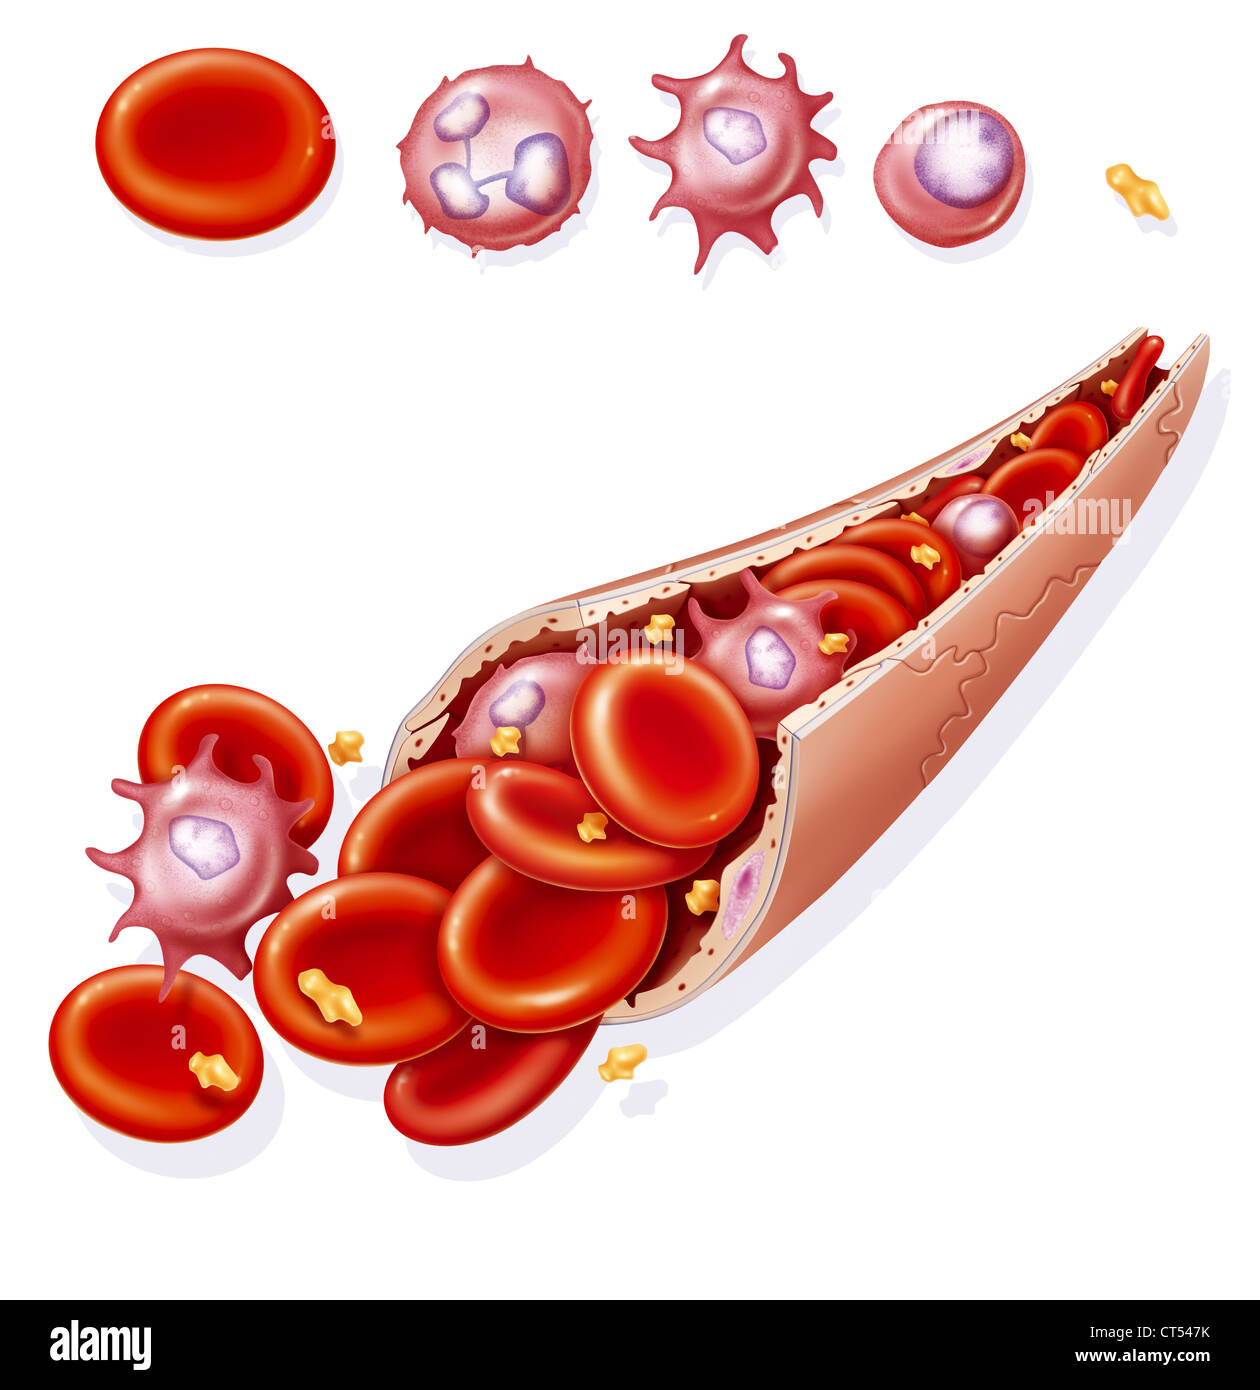 BLOOD CELL, DRAWING Stock Photo